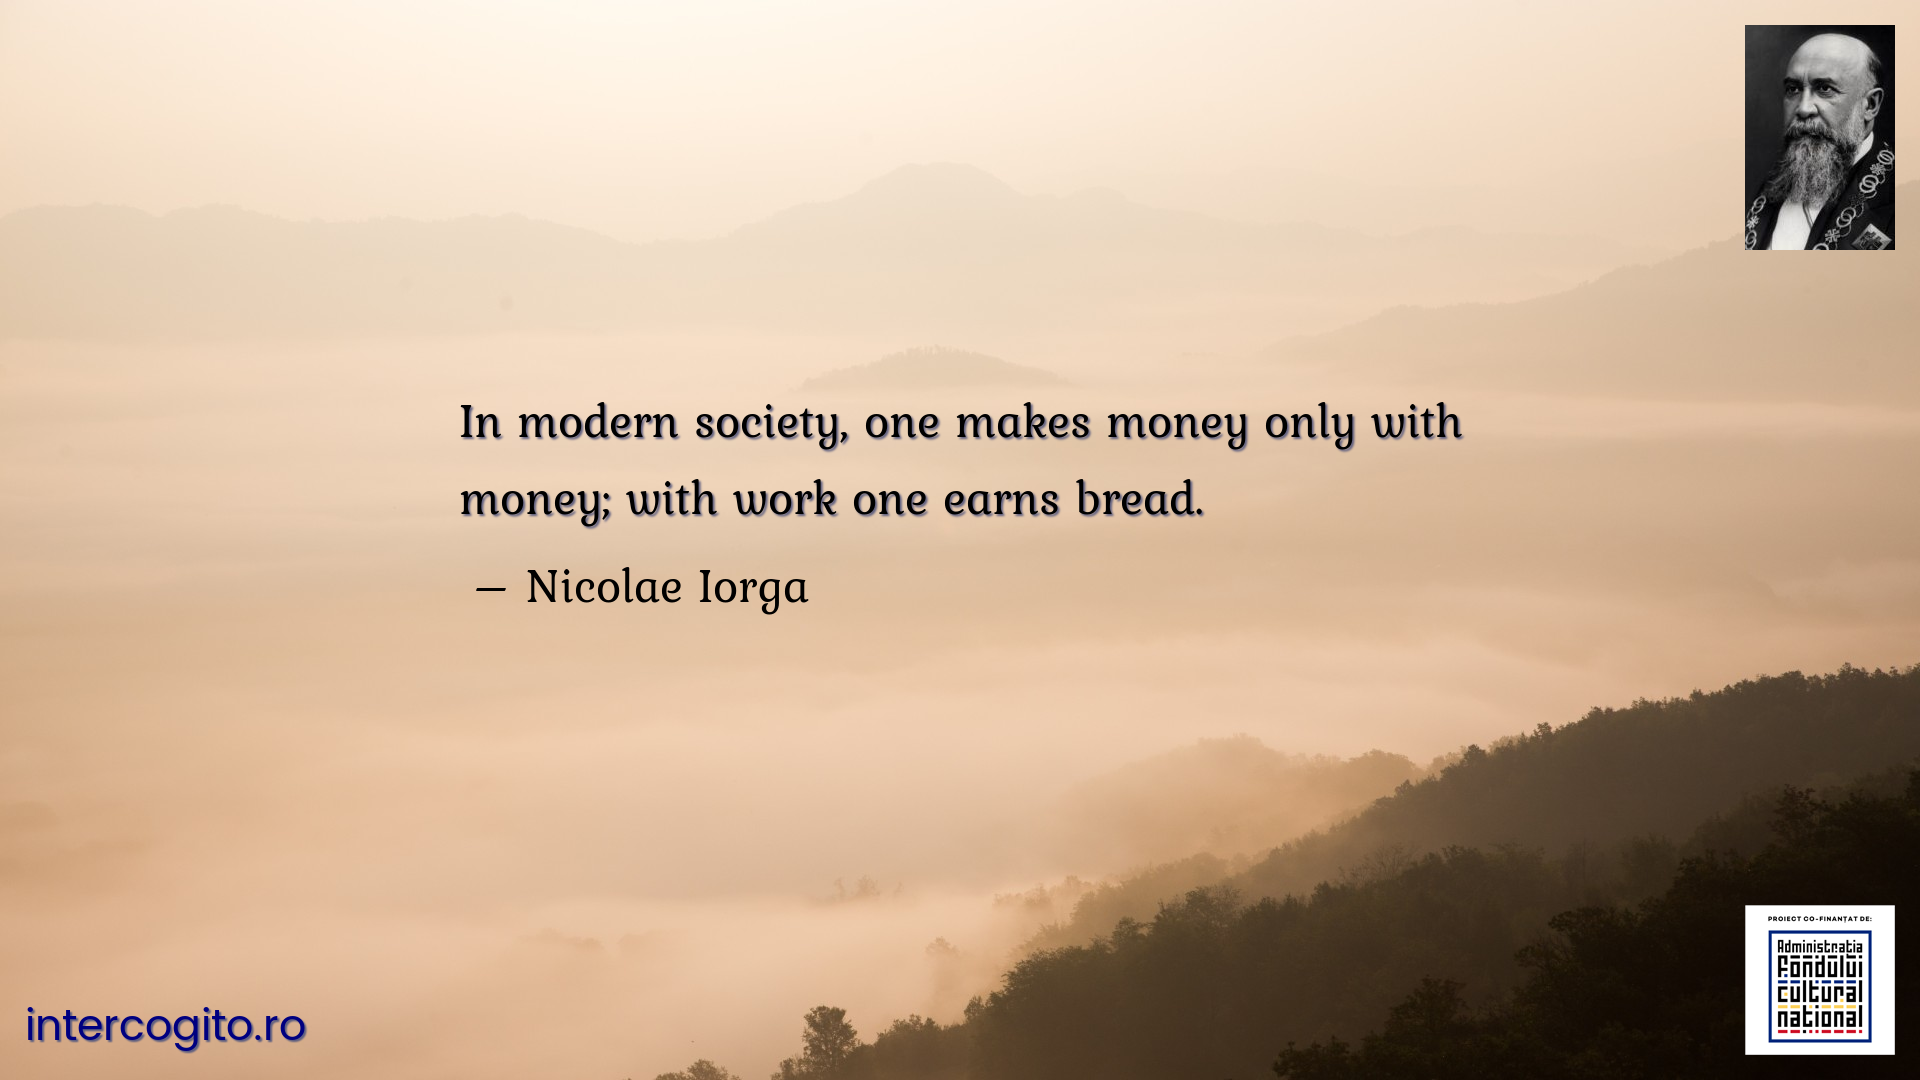 In modern society, one makes money only with money; with work one earns bread.